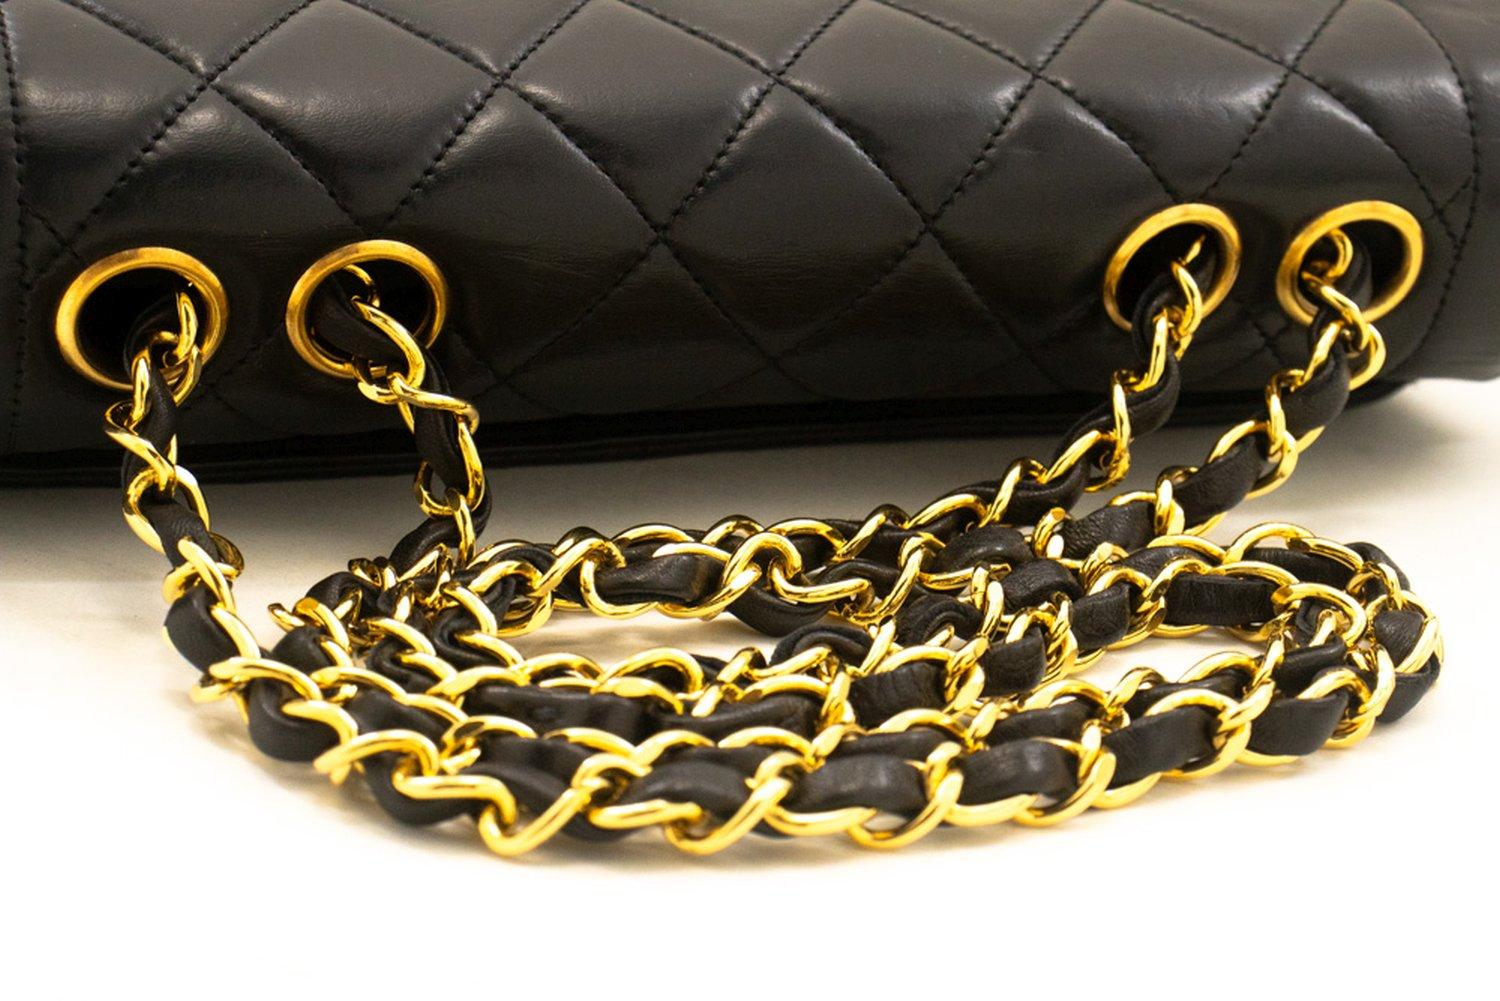 CHANEL Single Chain Flap Shoulder Bag Black Quilted Purse Lambskin 9